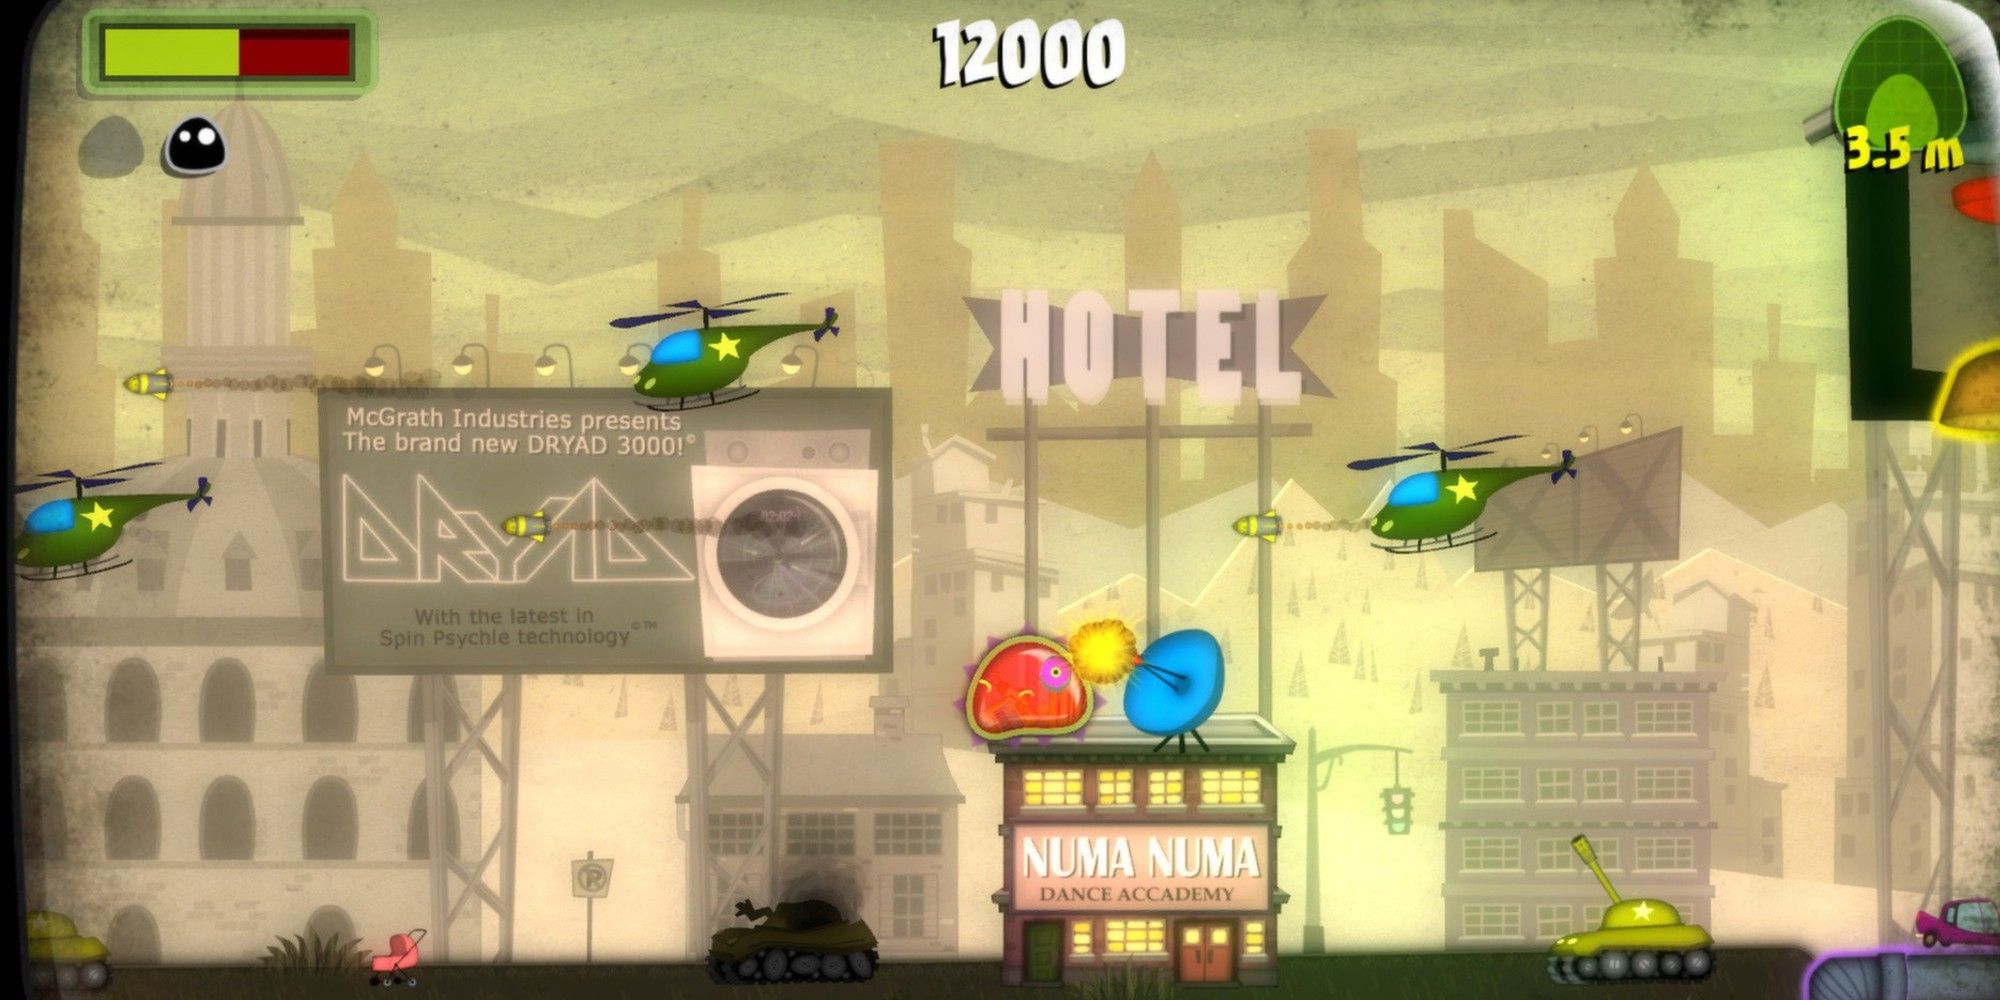 Helicopters and tanks firing at a red blob in a city.